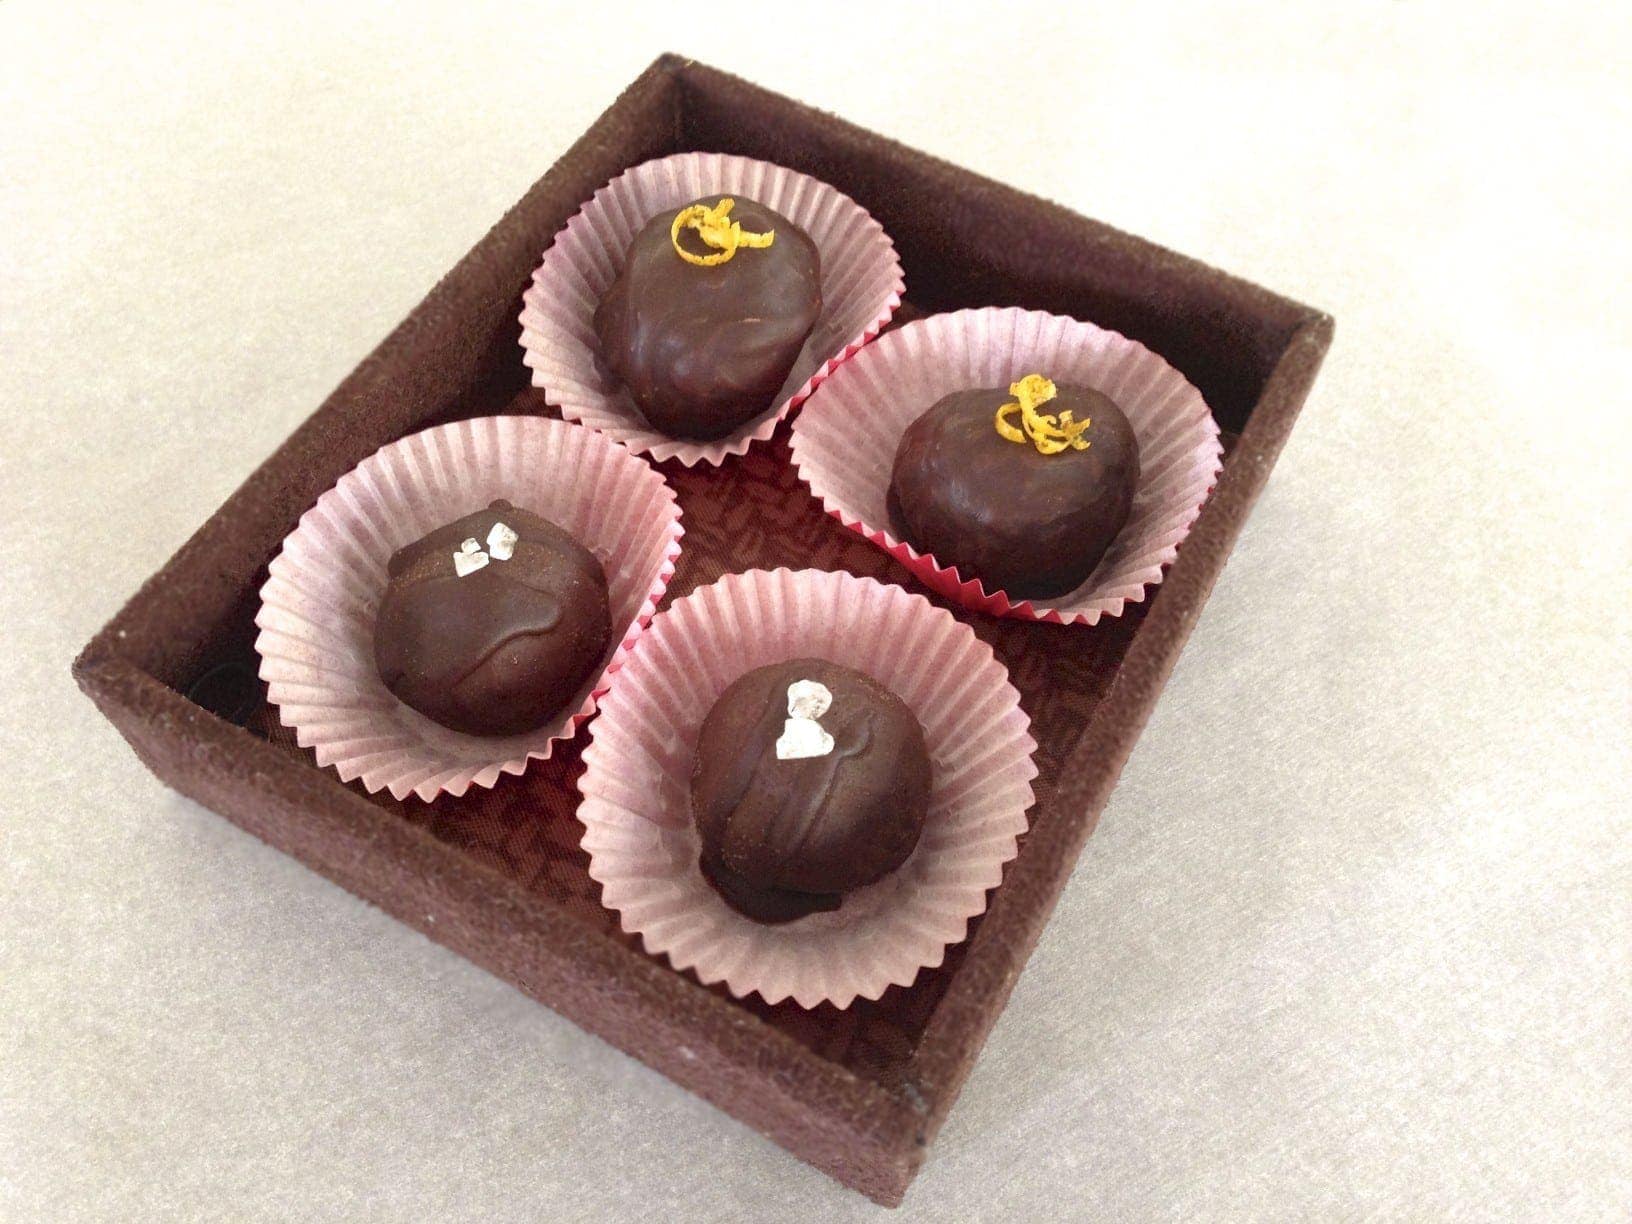 four handmade chocolate truffles in red paper cups sitting in a square serving dish